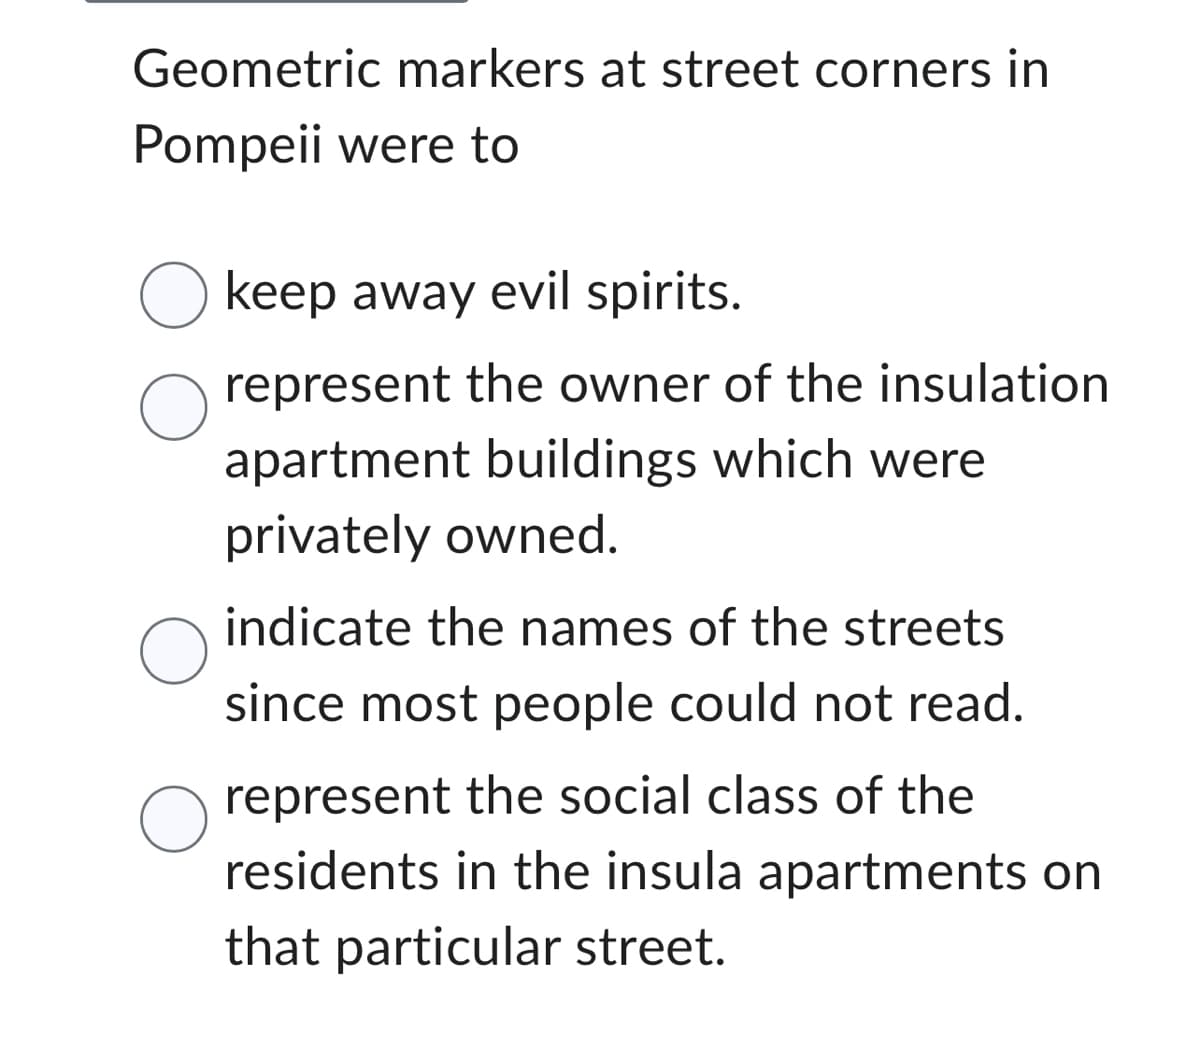 Geometric markers at street corners in
Pompeii were to
O keep away evil spirits.
represent the owner of the insulation
apartment buildings which were
privately owned.
O
indicate the names of the streets
since most people could not read.
represent the social class of the
residents in the insula apartments on
that particular street.